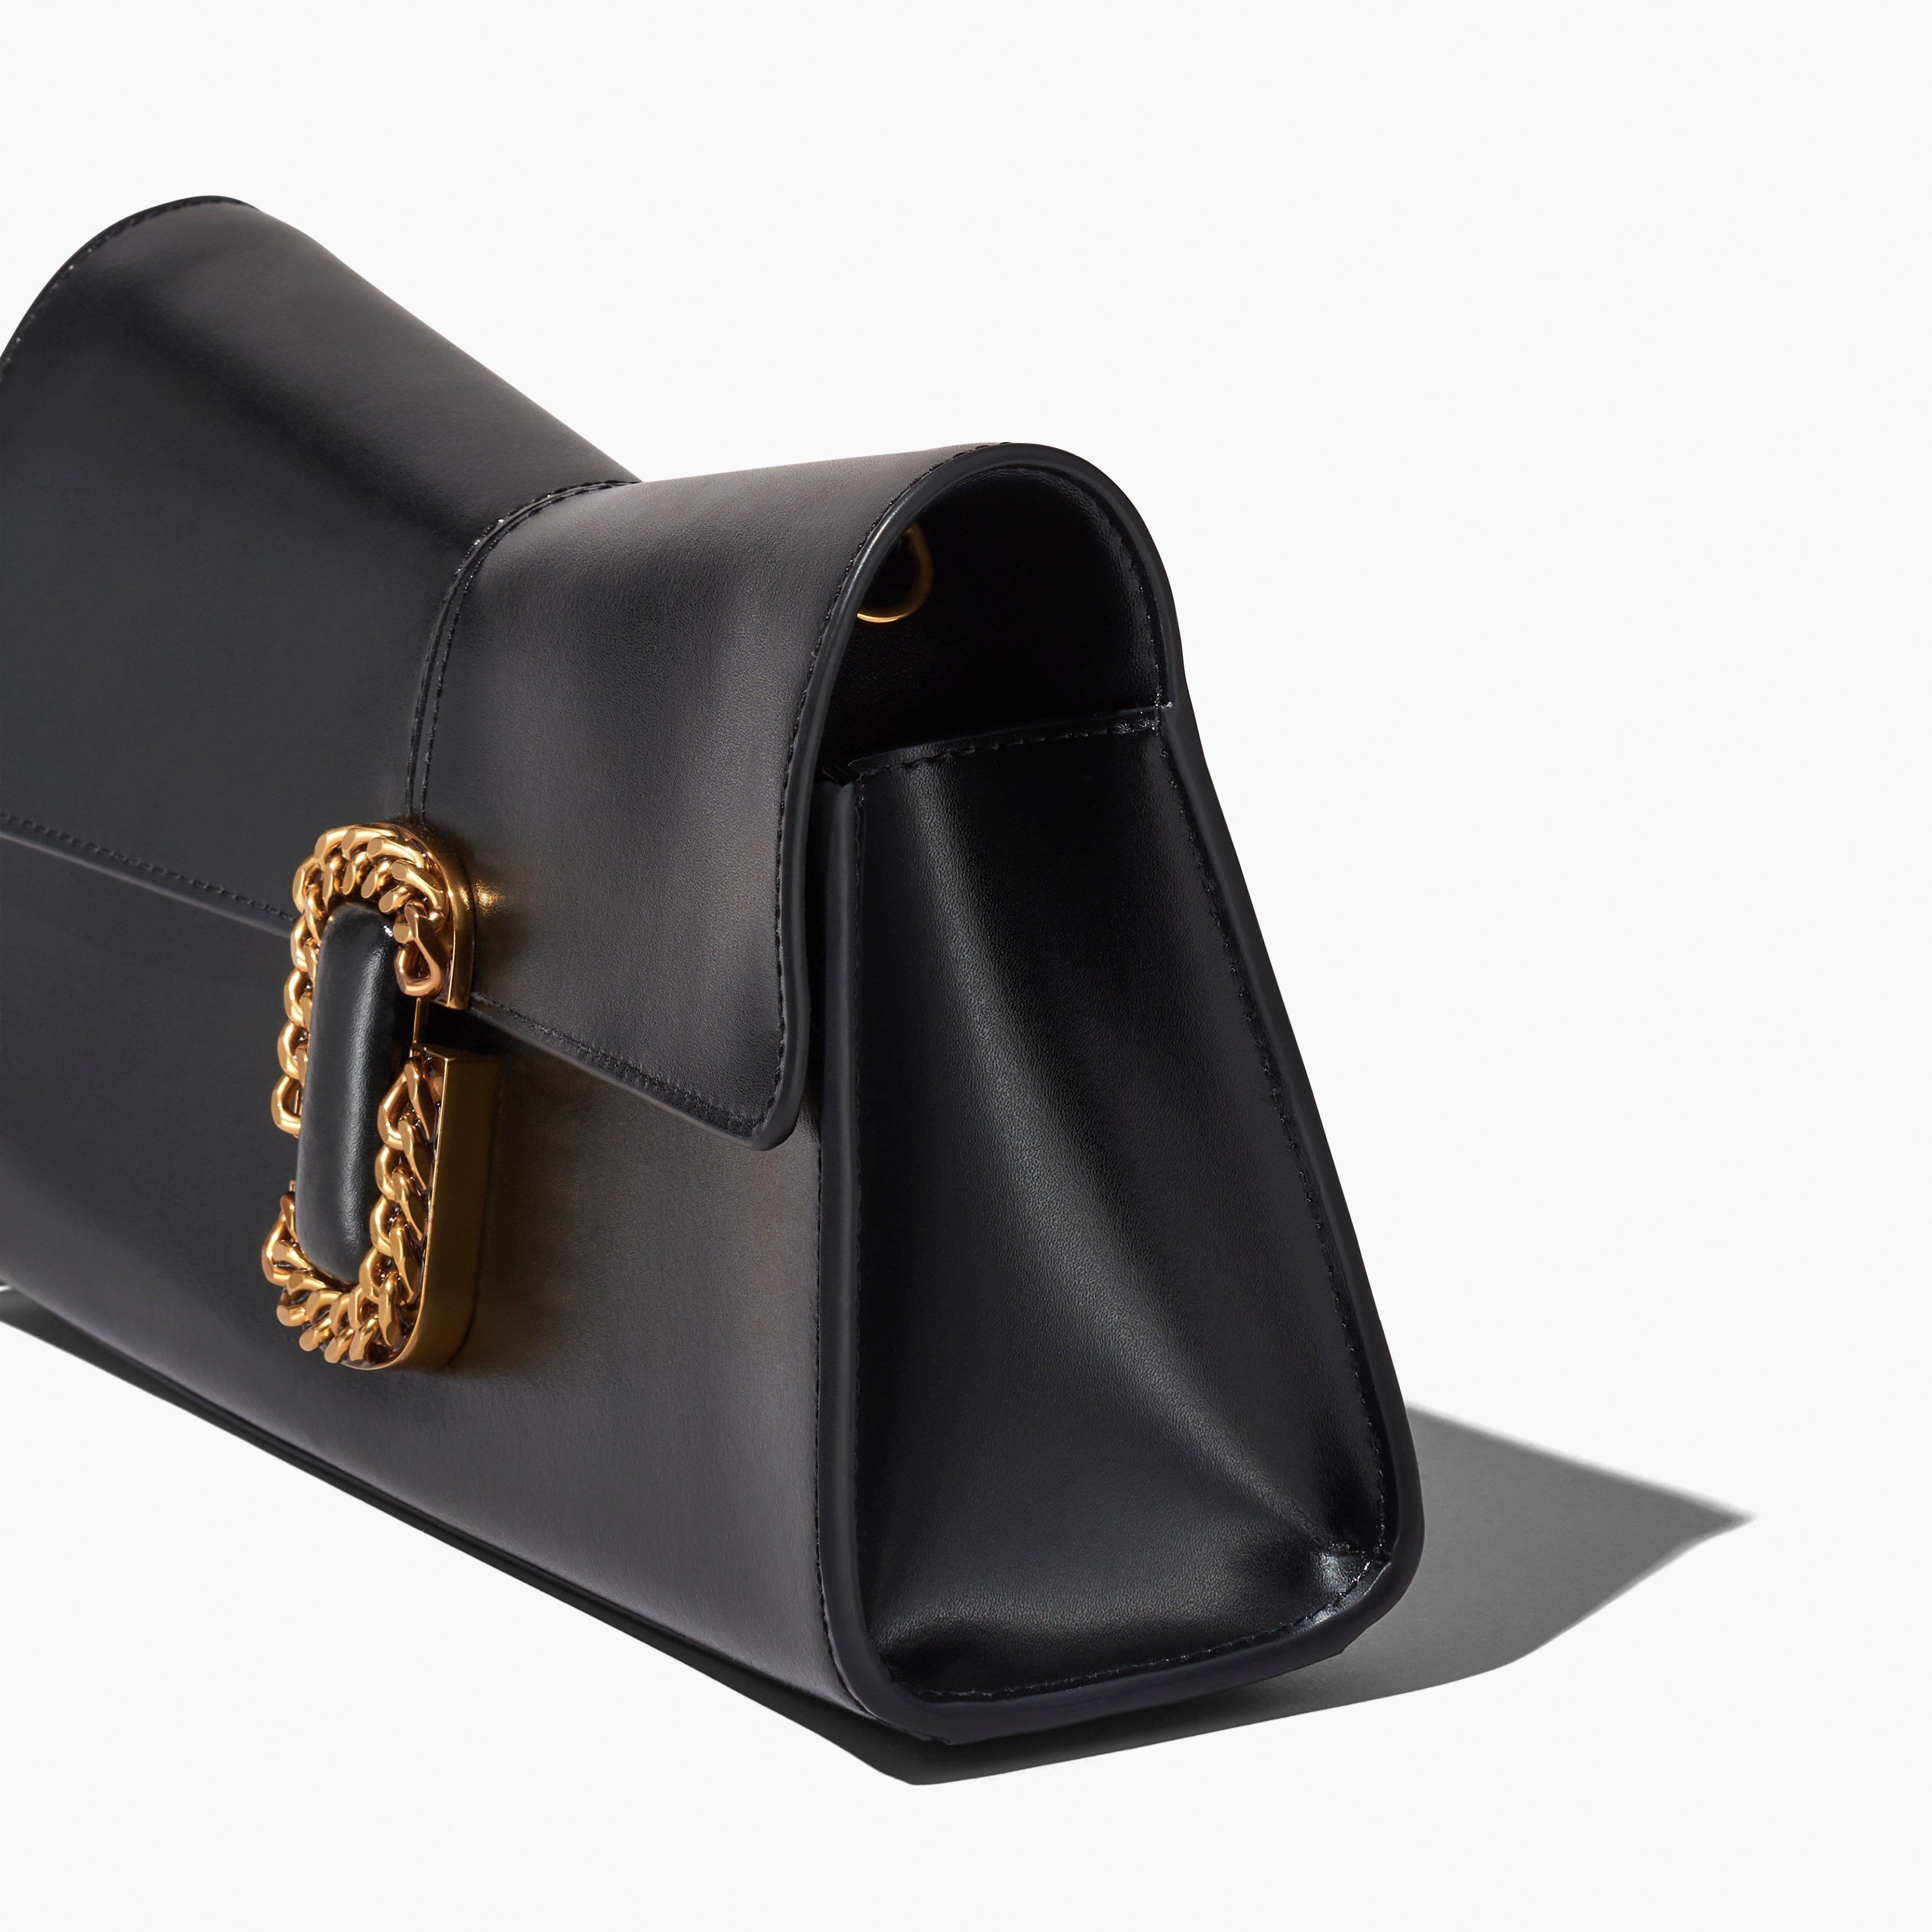 THE ST. MARC CONVERTIBLE CLUTCH - 6